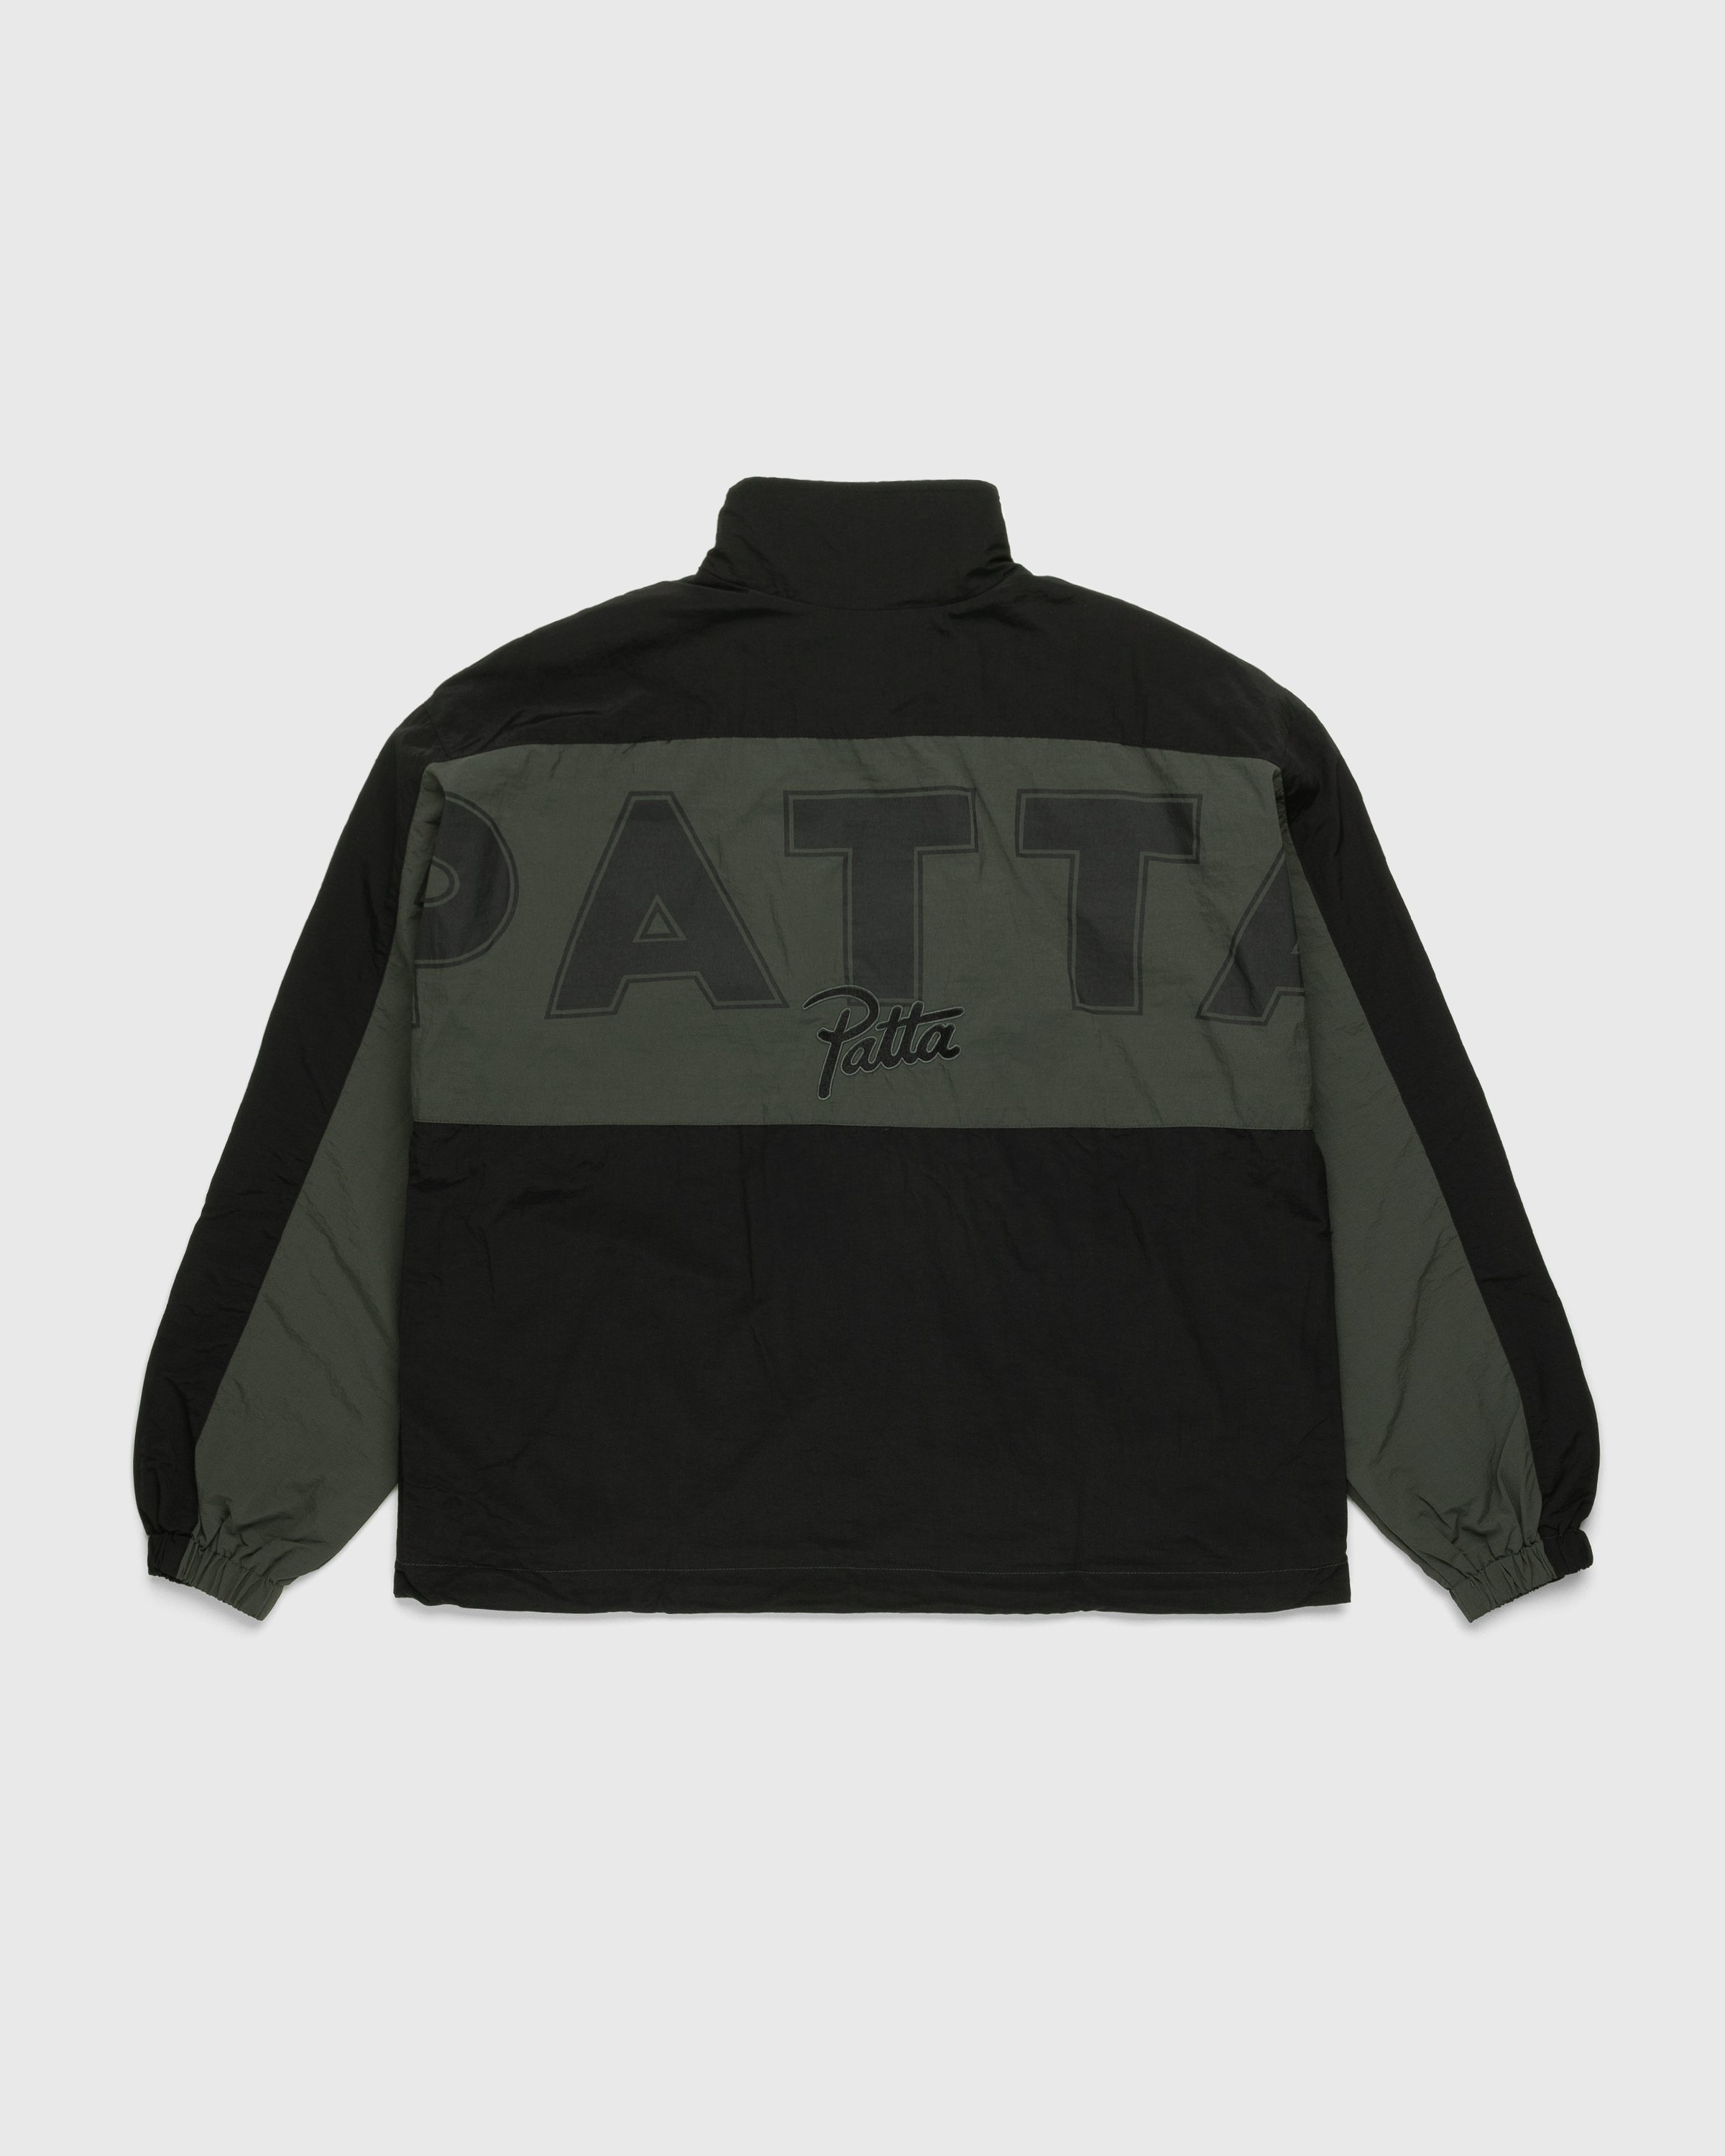 Patta – Athletic Track Jacket Black/Charcoal Grey - Outerwear - Black - Image 2